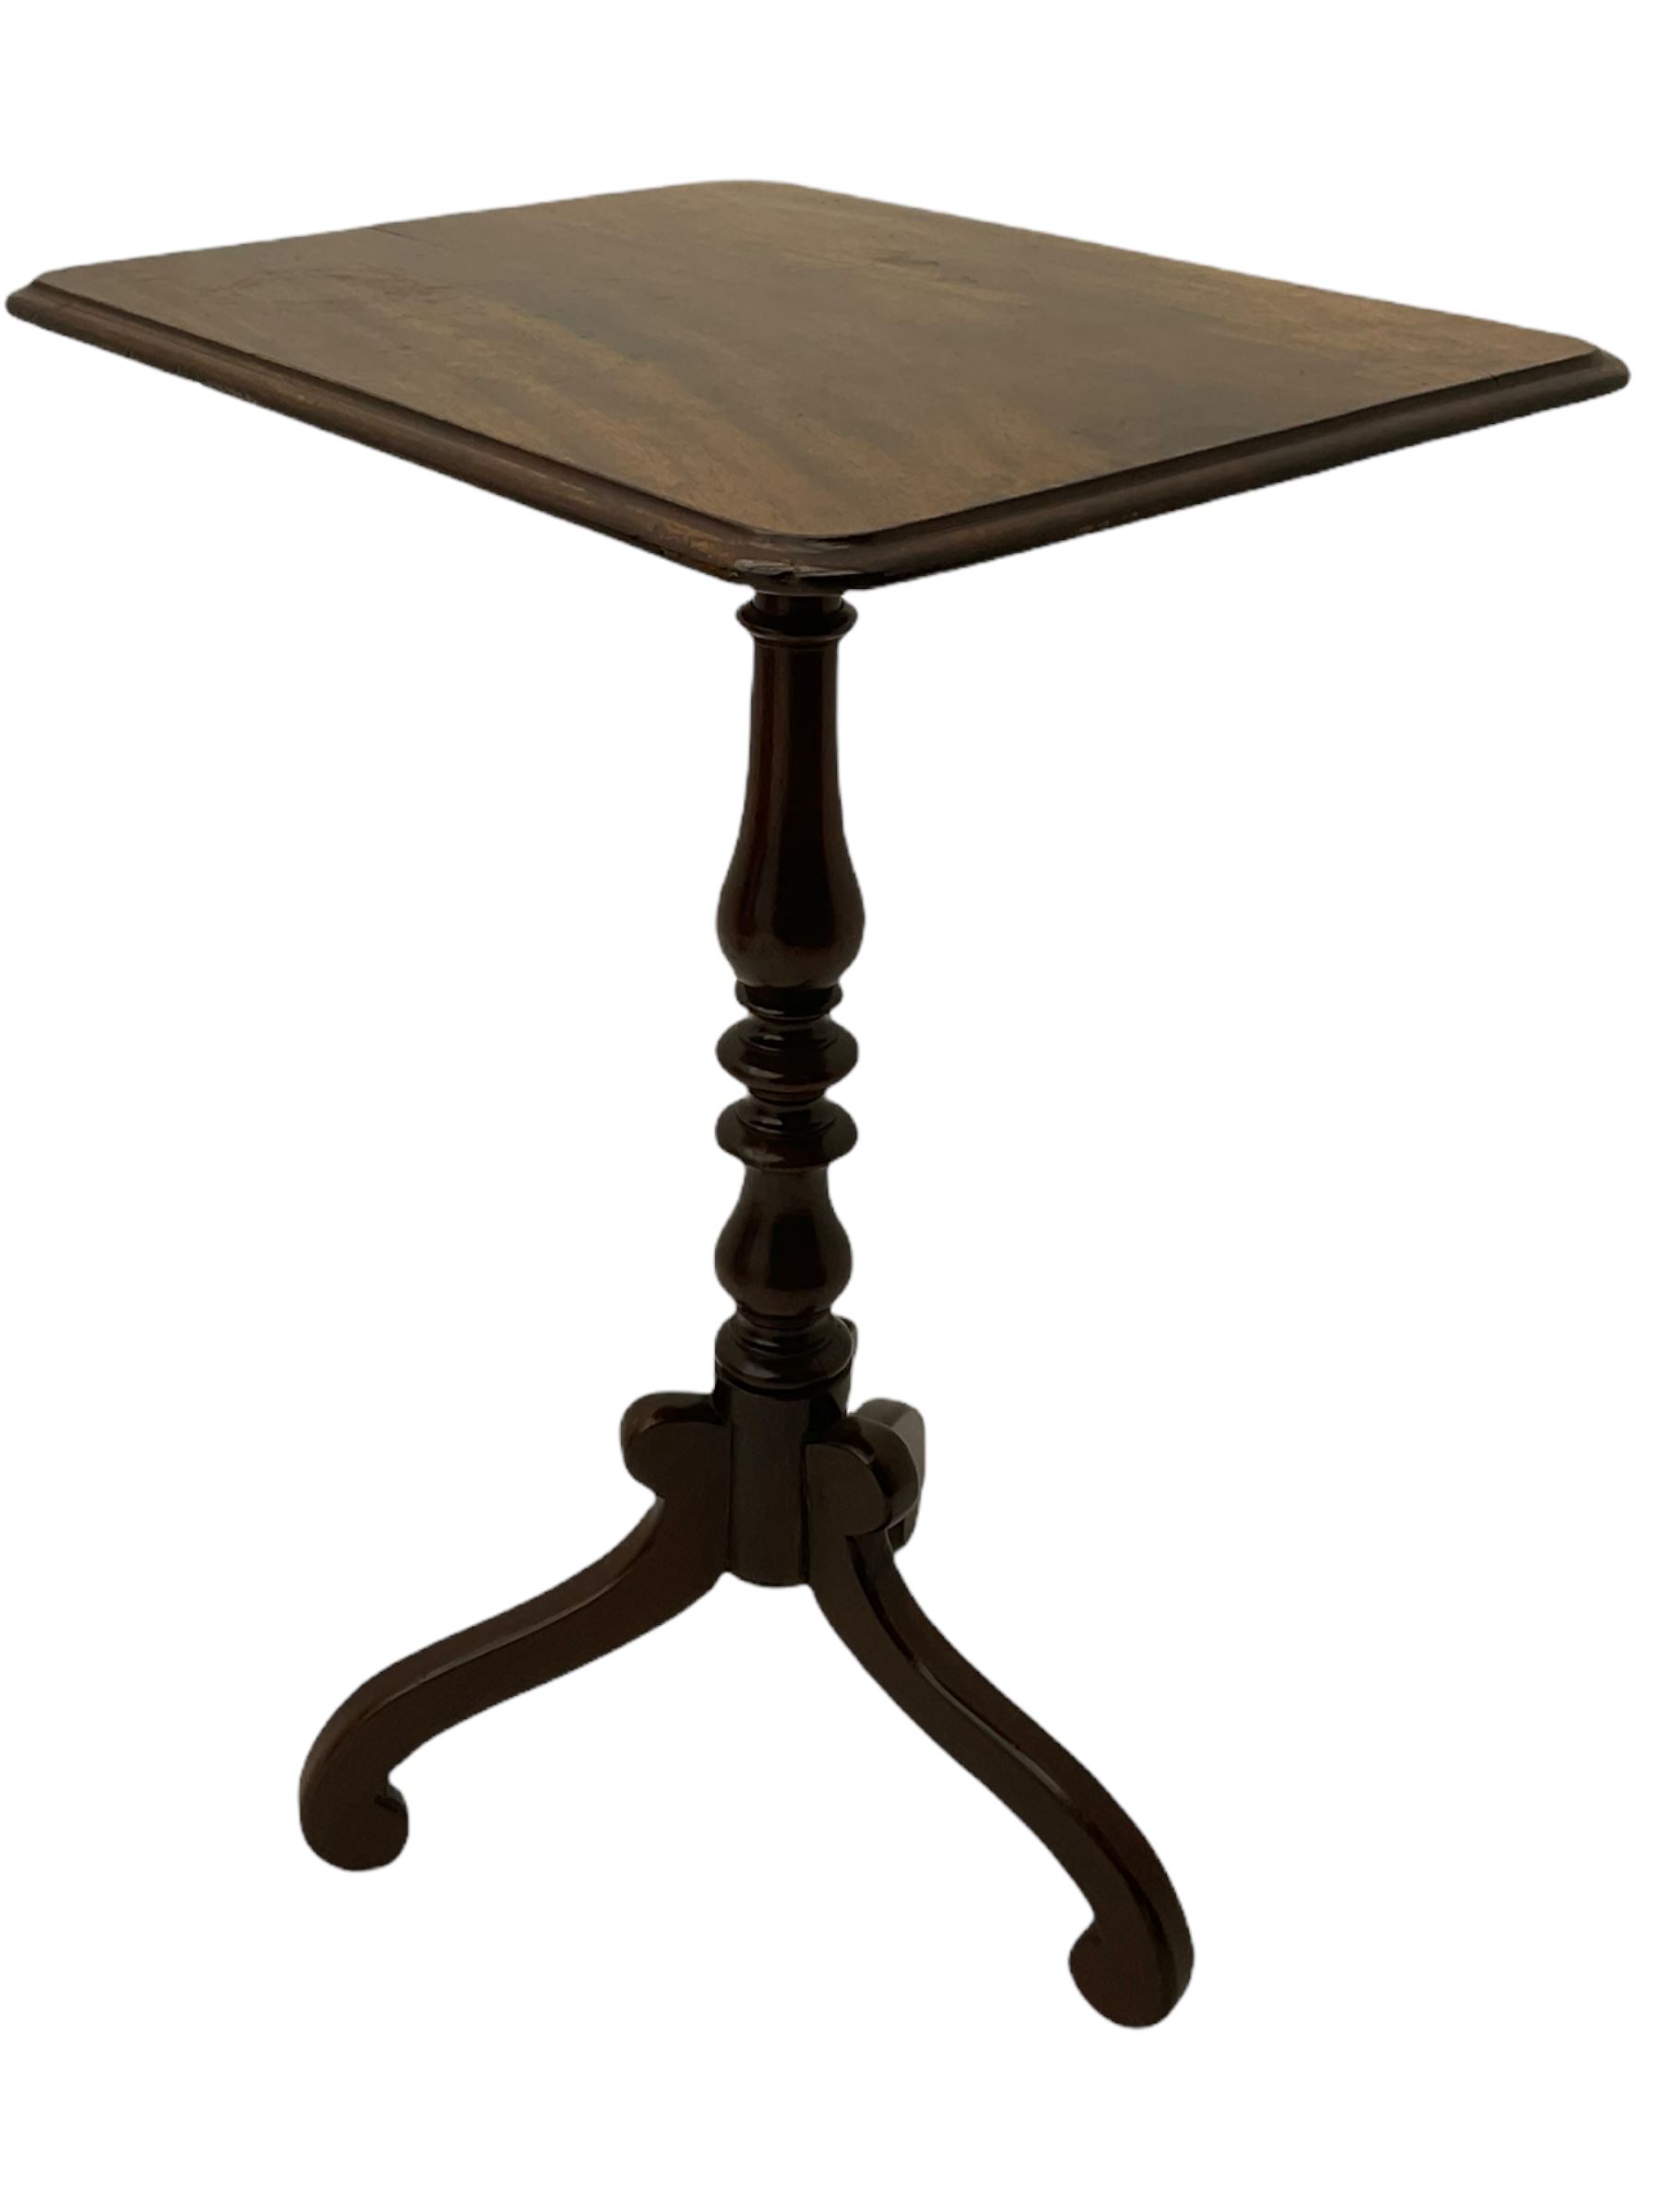 19th century tripod table - Image 5 of 5